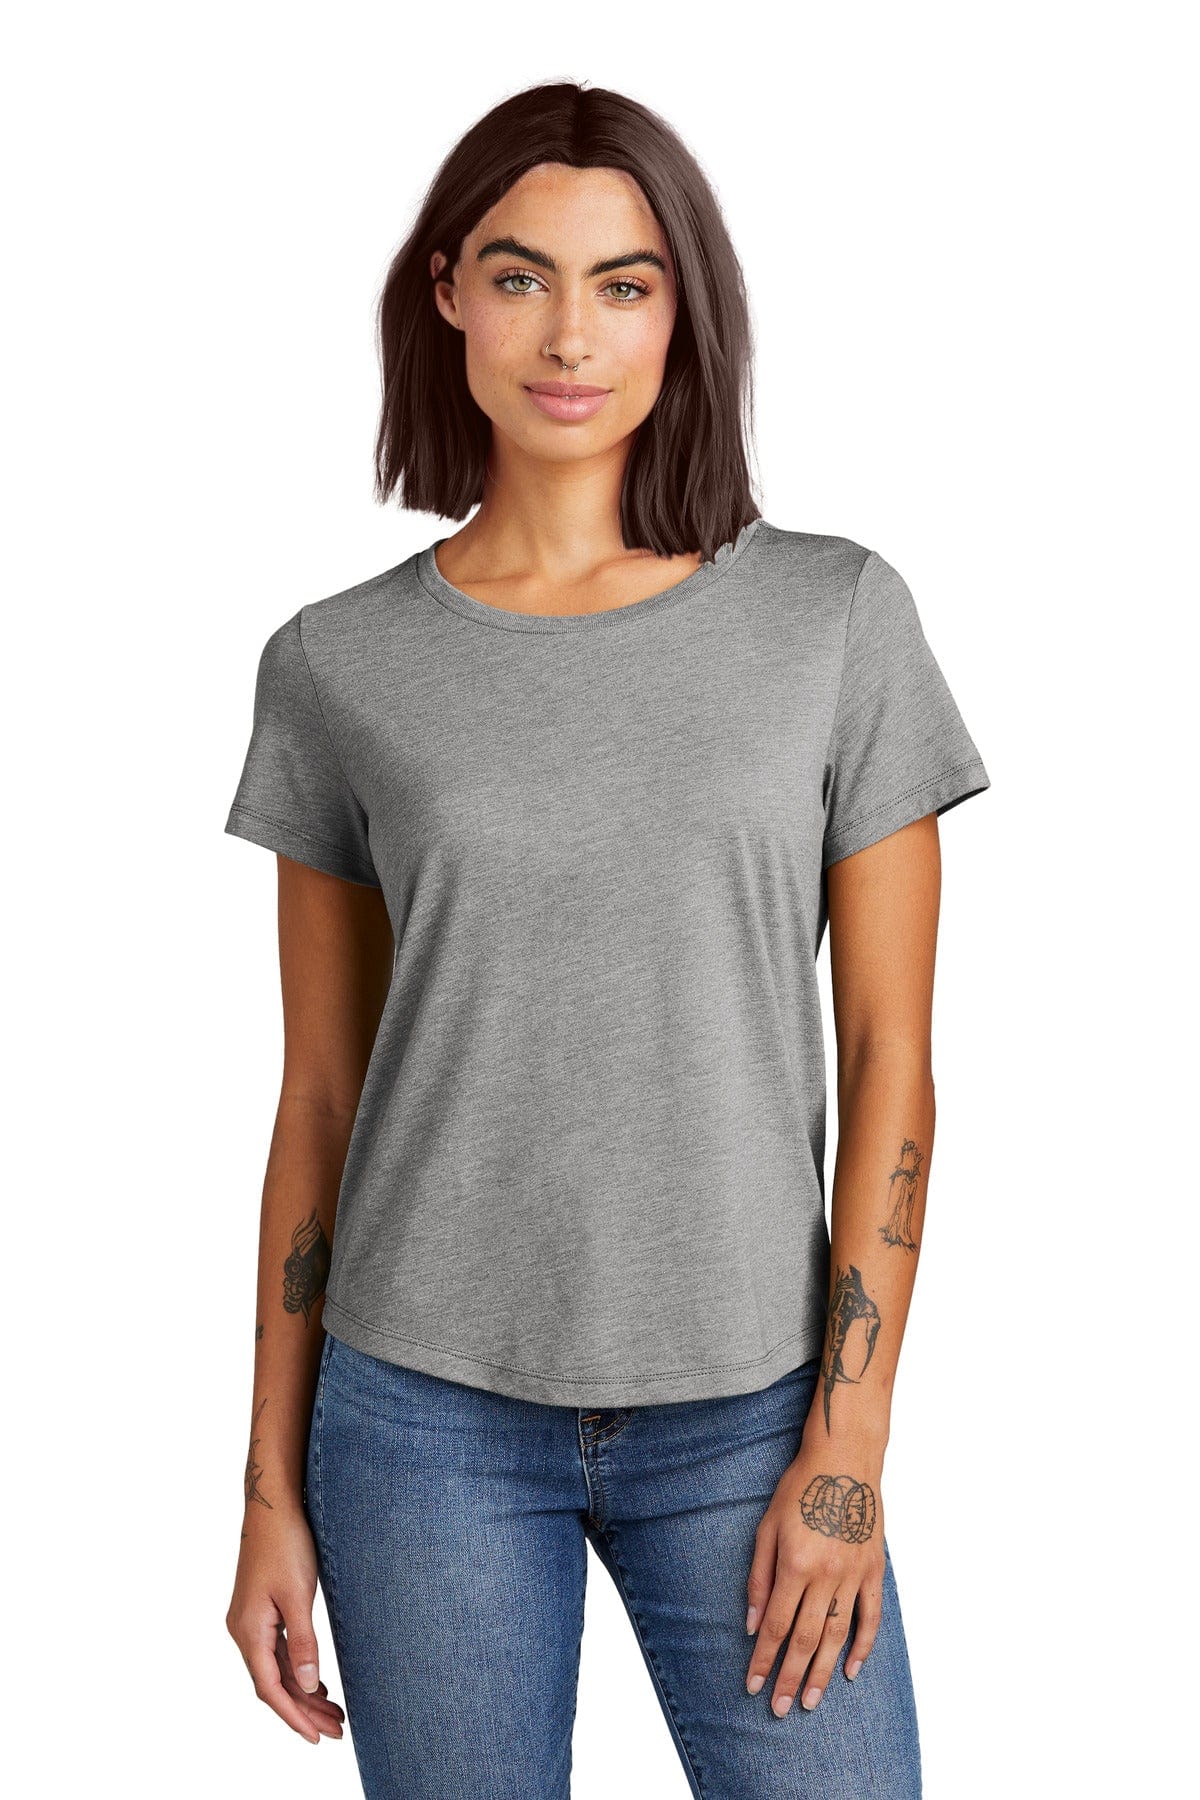 Allmade ® Women's Relaxed Tri-Blend Scoop Neck Tee AL2015